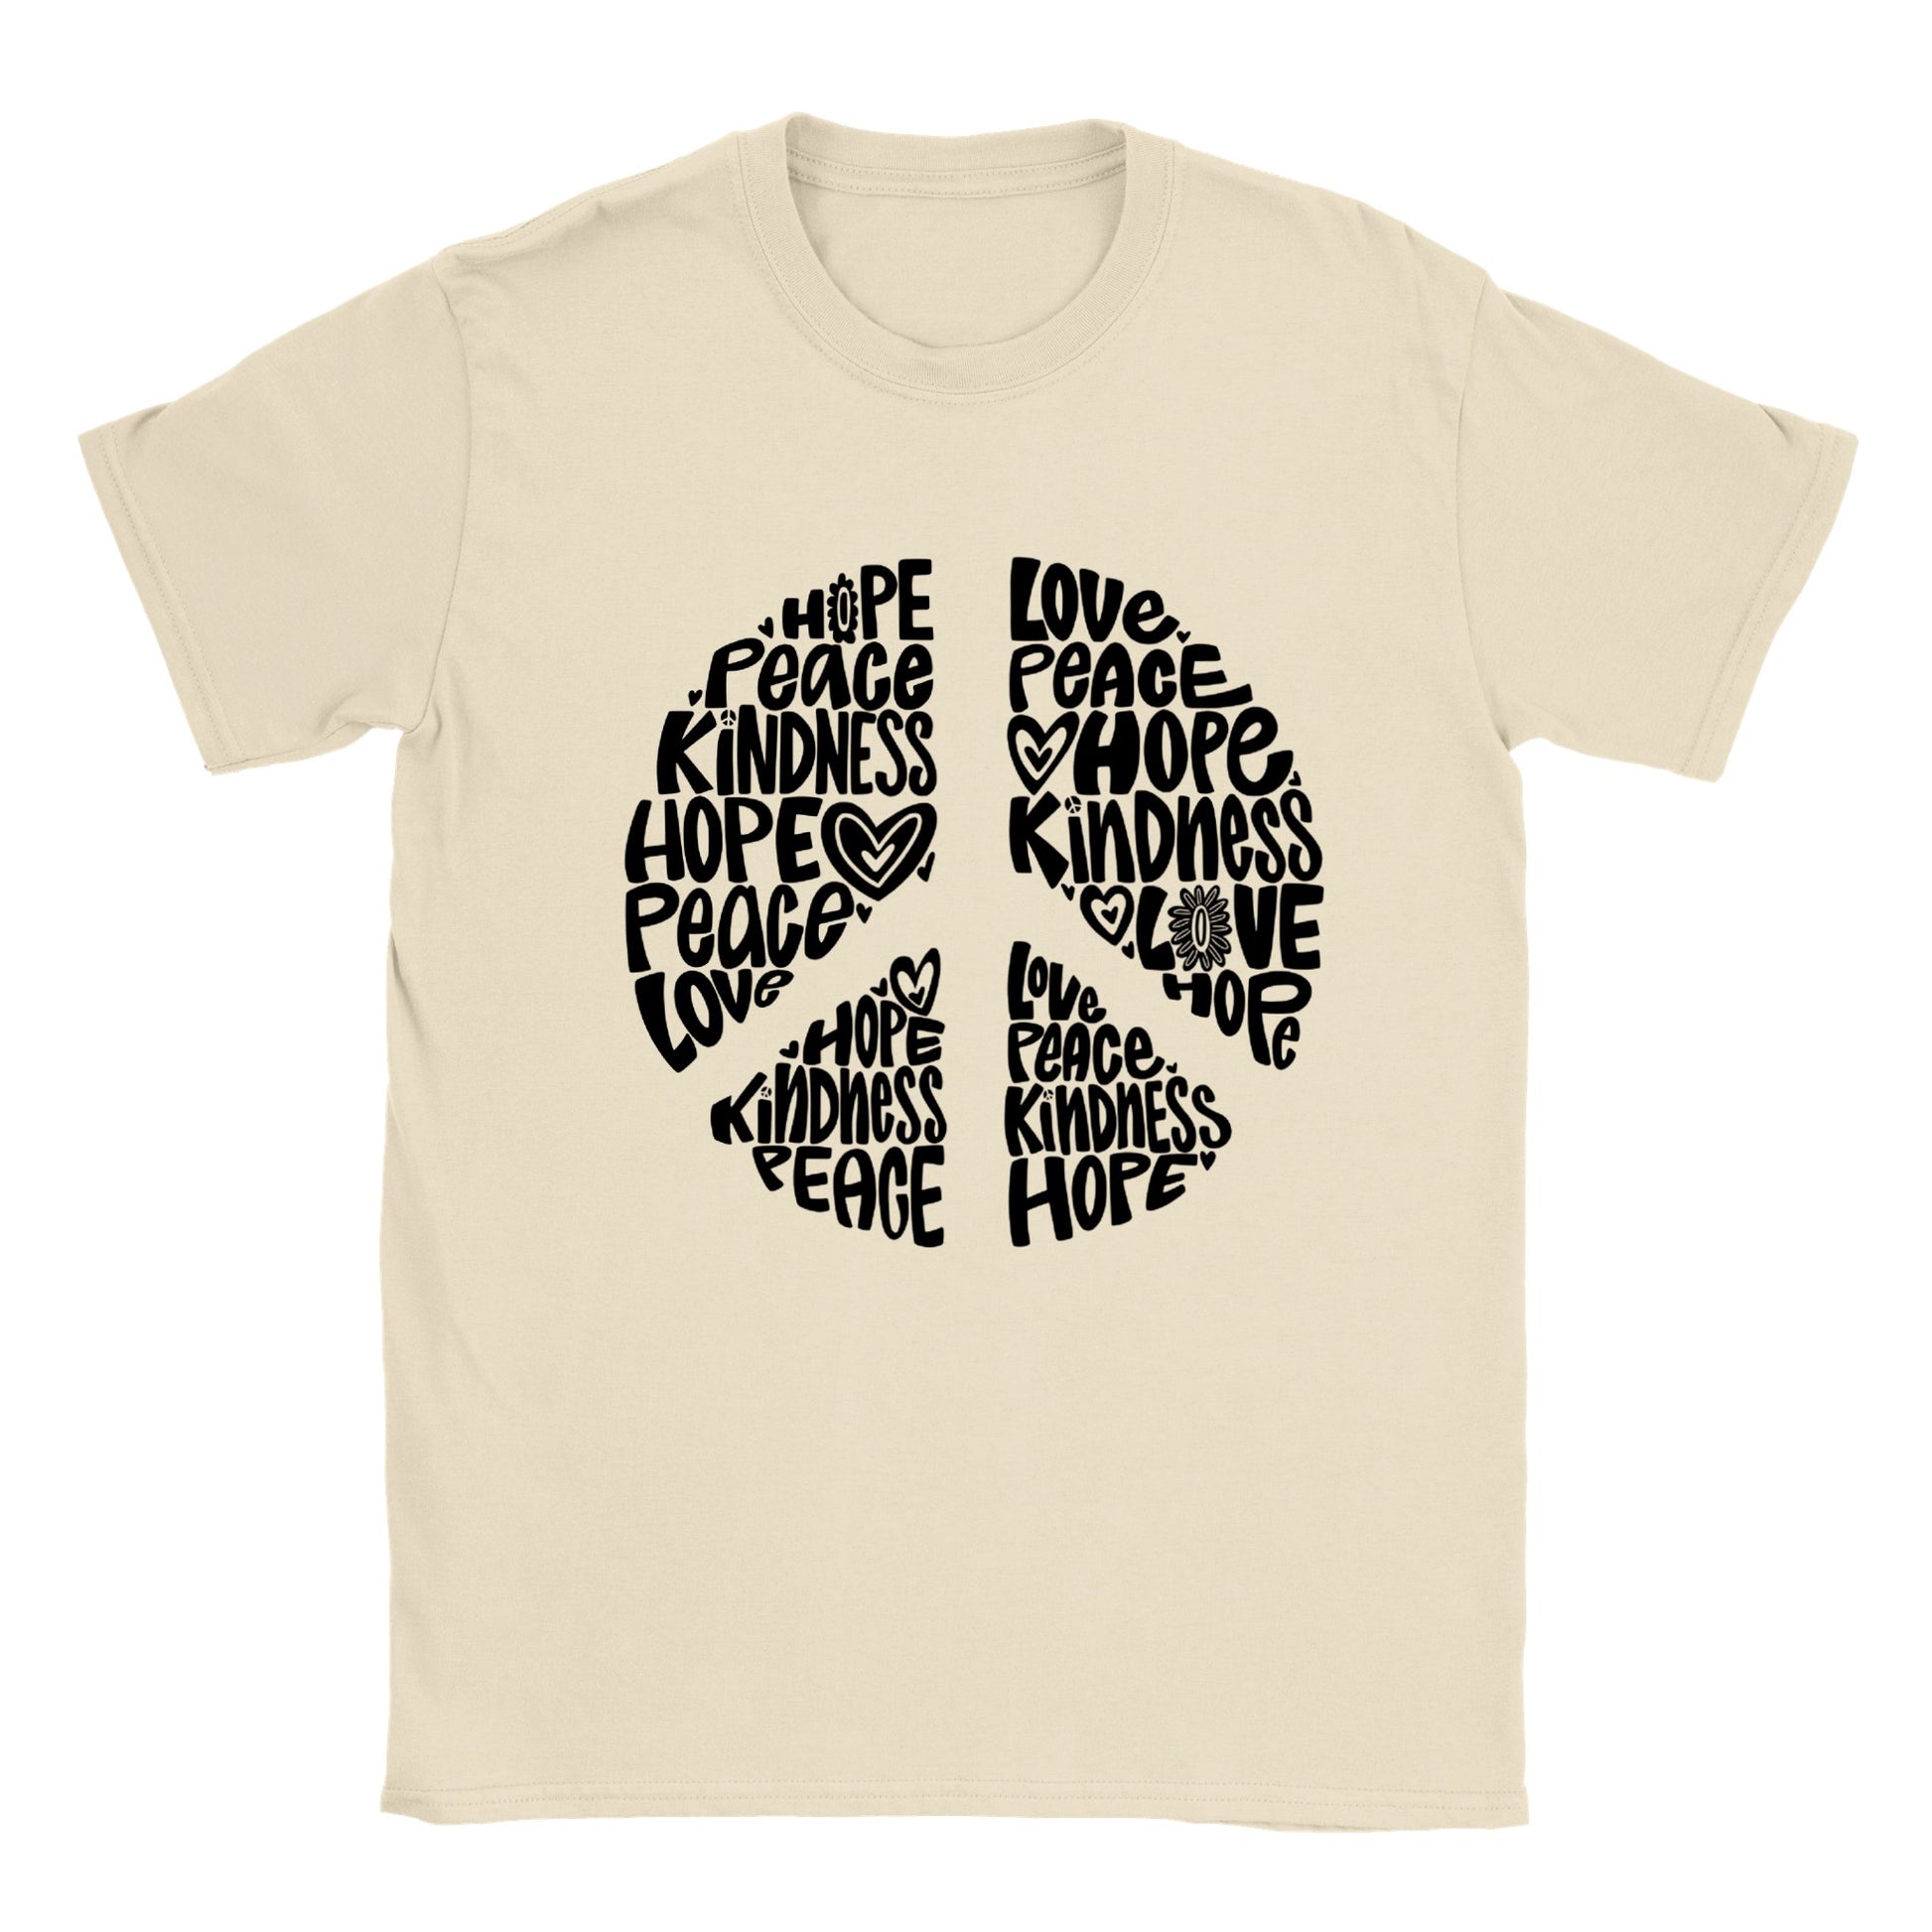 Love, Hope, Peace, and Kindness - Classic Unisex Crewneck T-shirt - Mister Snarky's